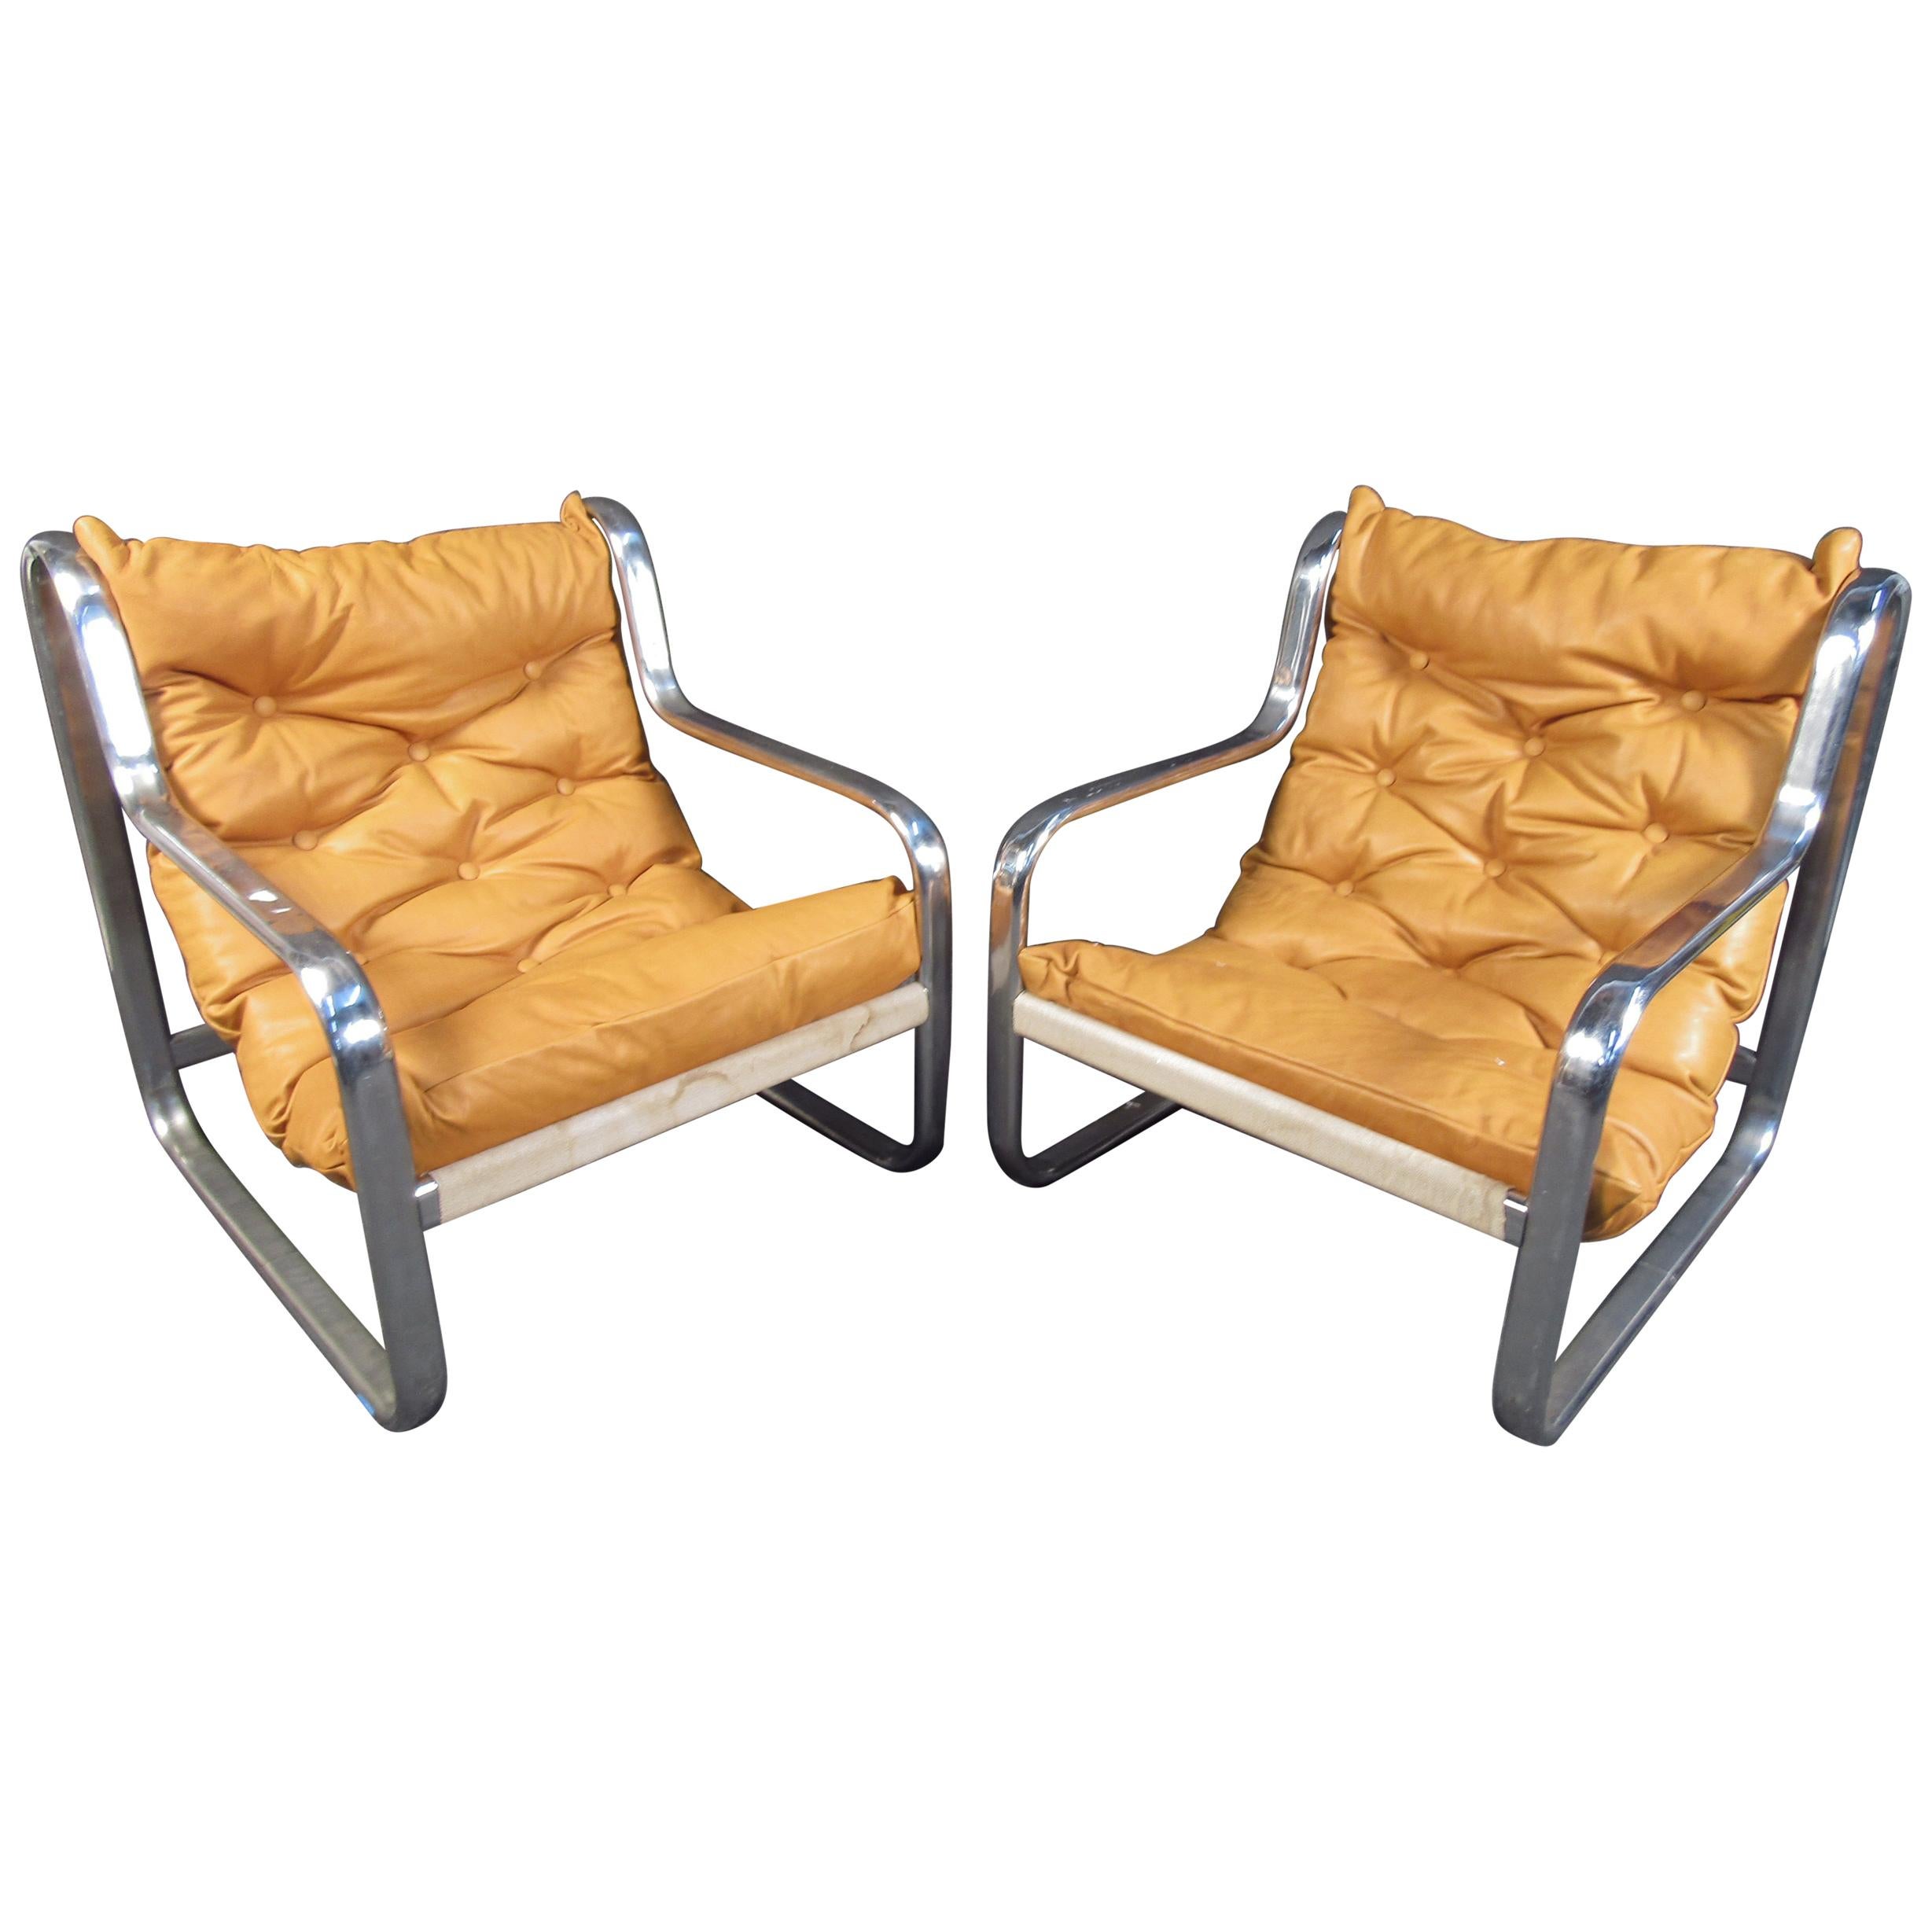 Pair of Stunning Midcentury Leather/ Chrome Italian Lounge Chairs